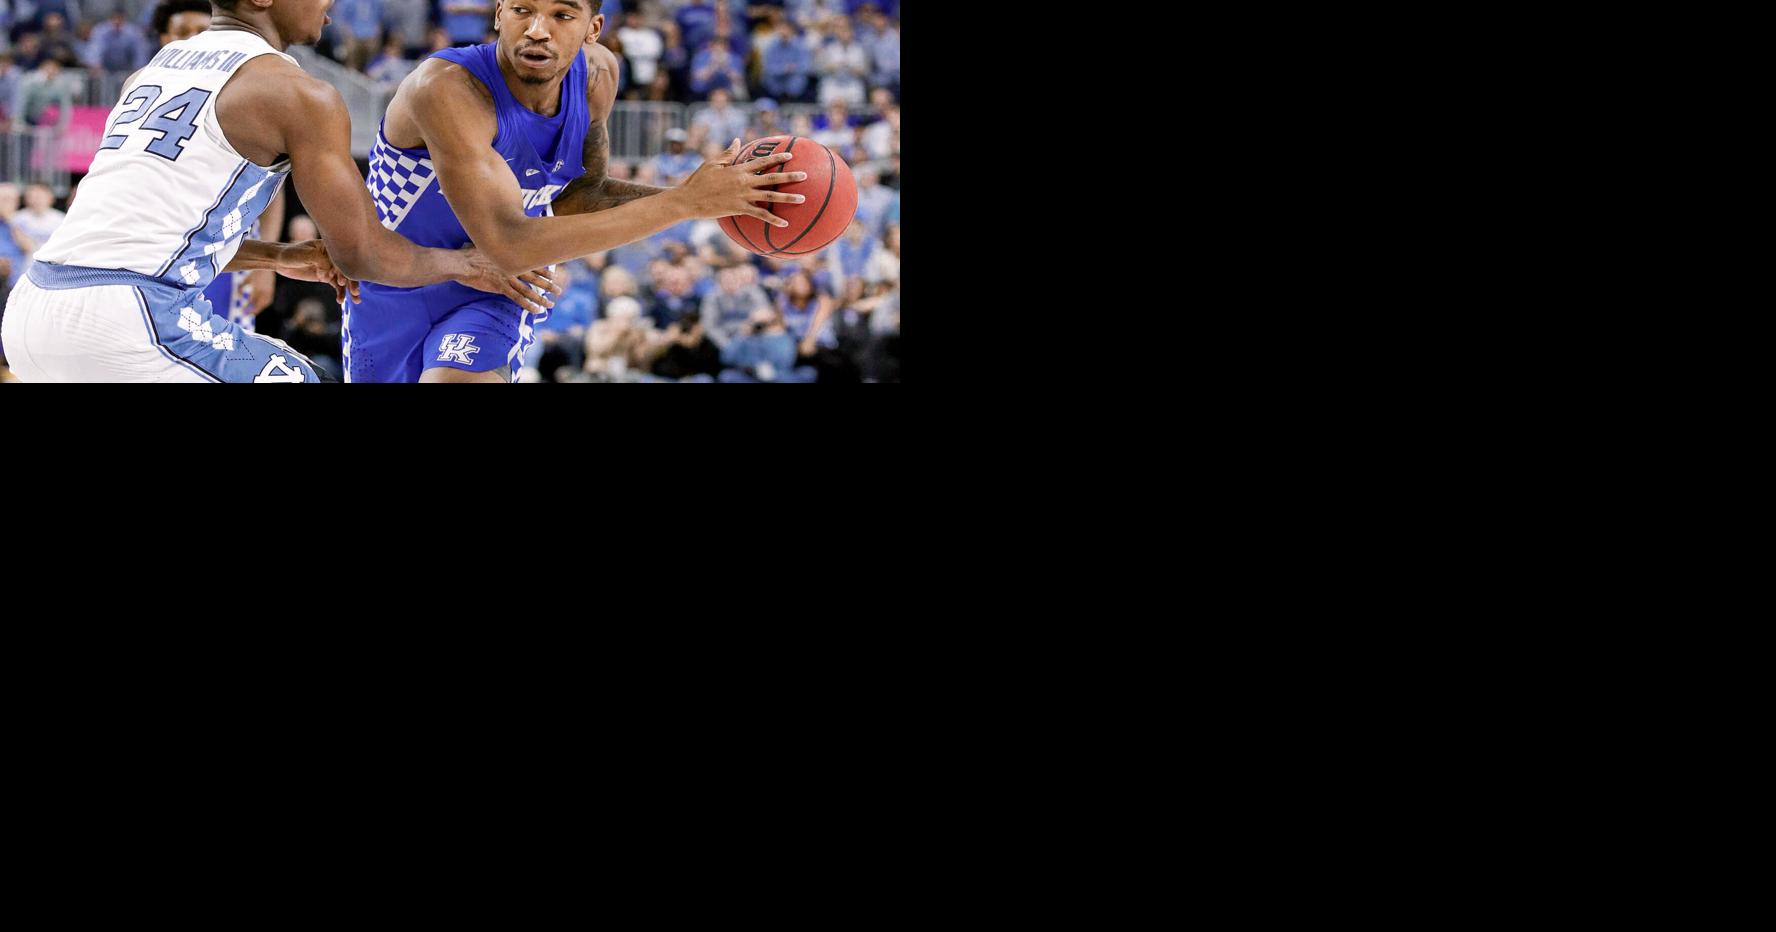 Exciting games usually happen when UNC, Kentucky meet on the basketball court